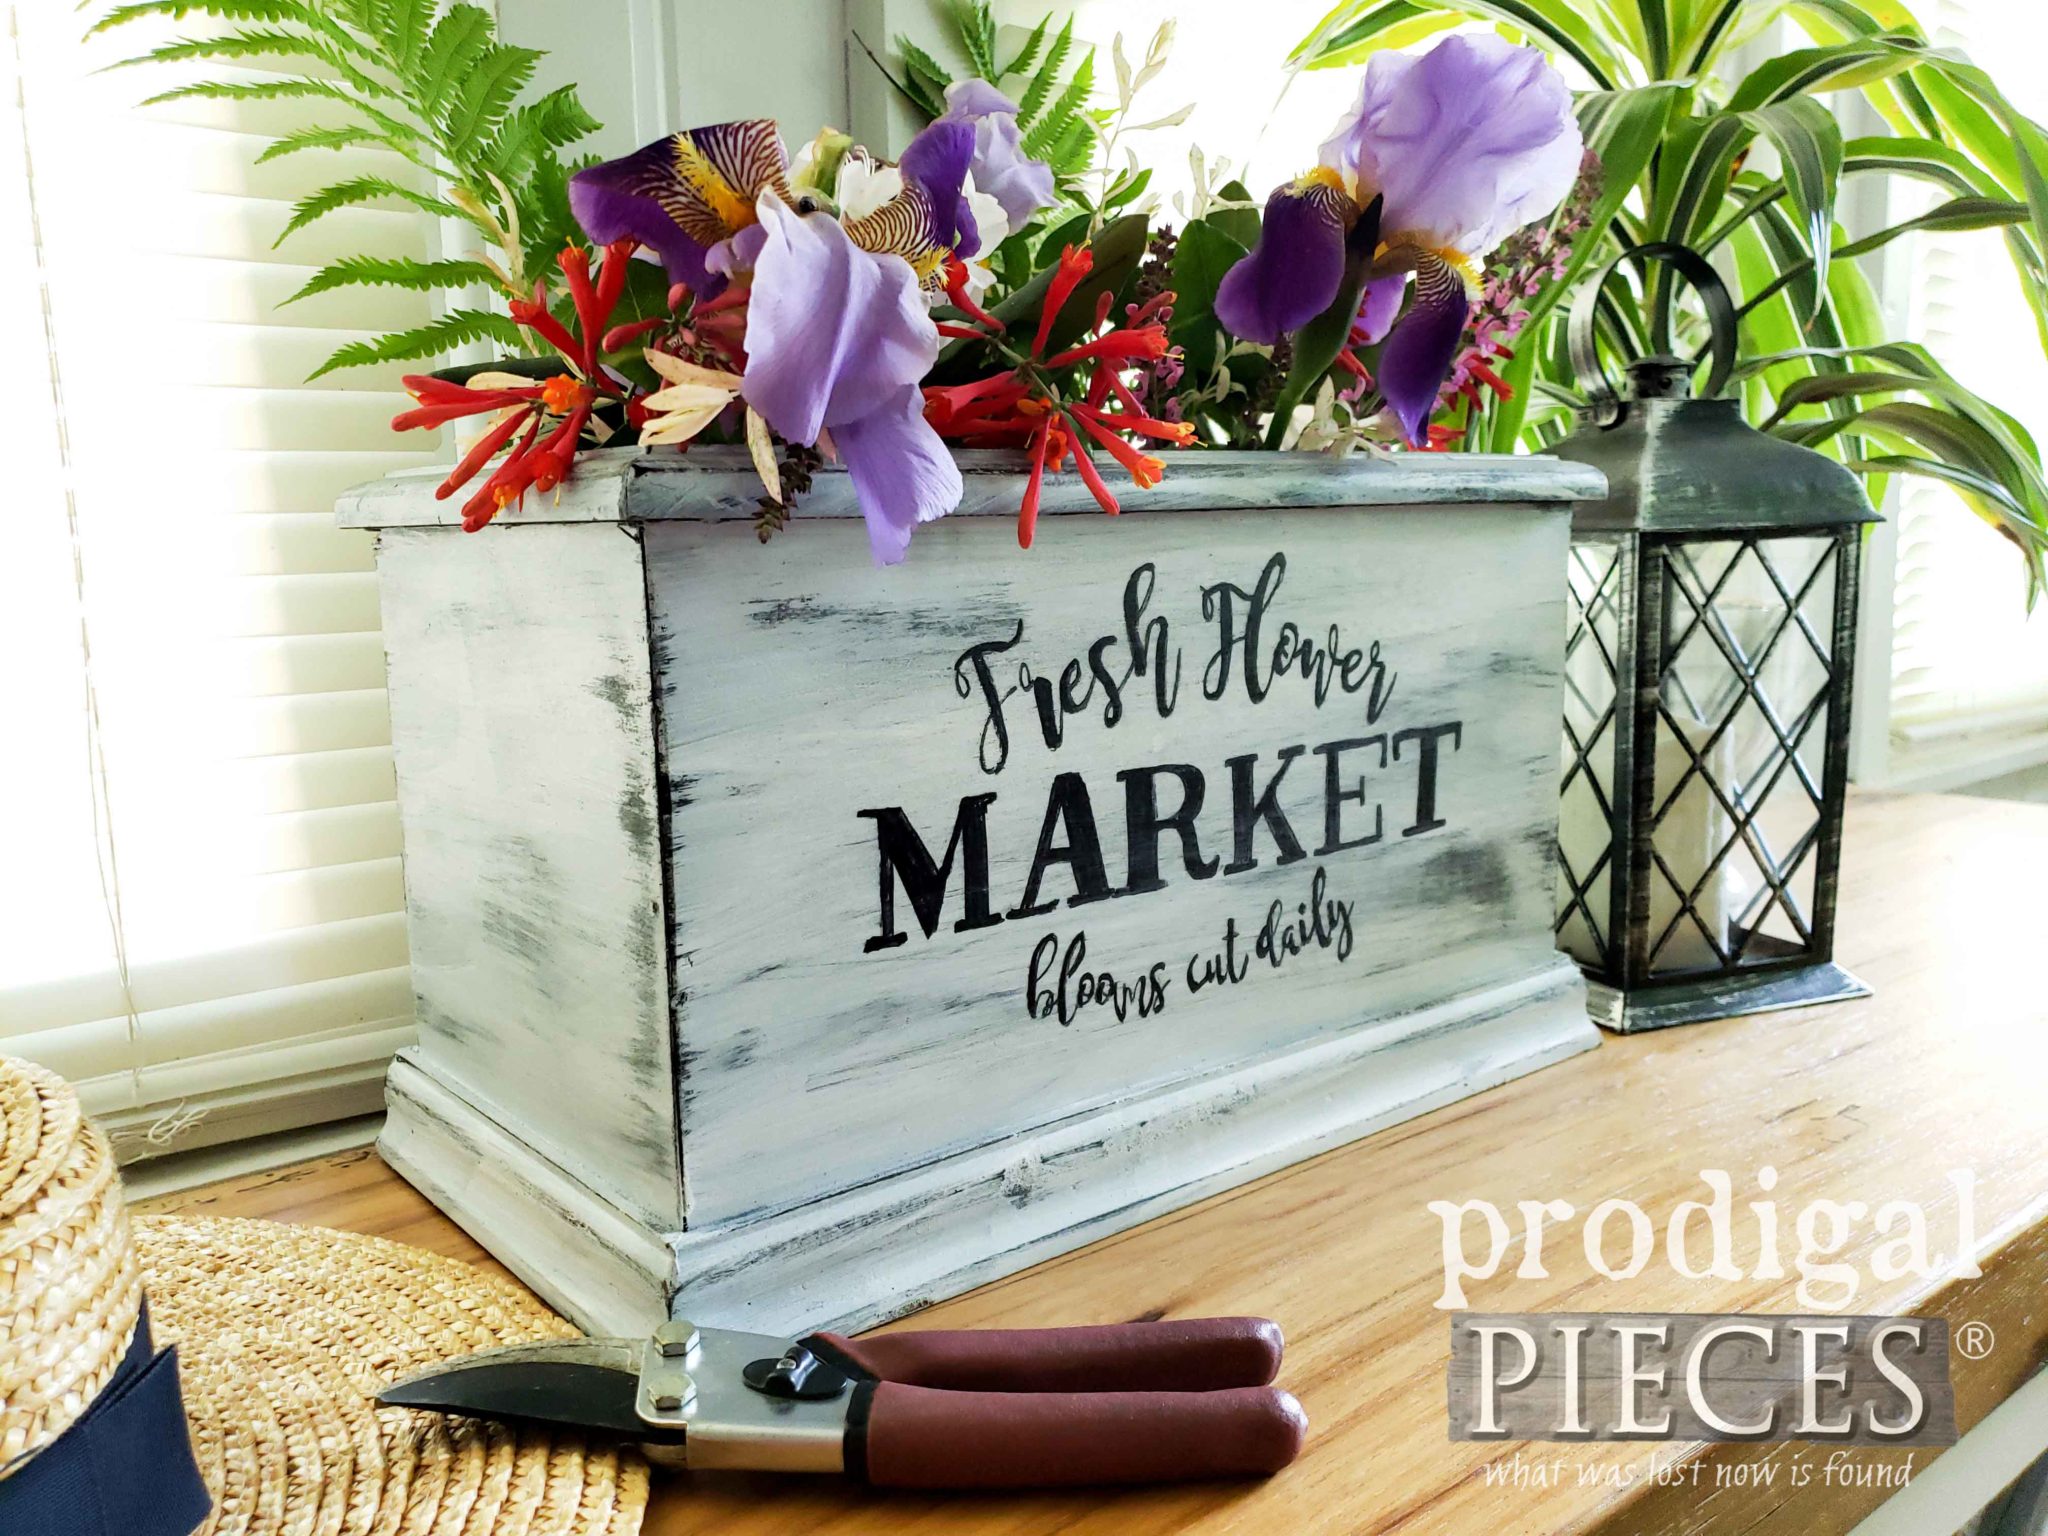 DIY Handmade Flower Box from and Upcycled Footboard by Larissa of Prodigal Pieces | prodigalpieces.com #prodigalpieces #diy #home #handmade #homedecor #farmhouse